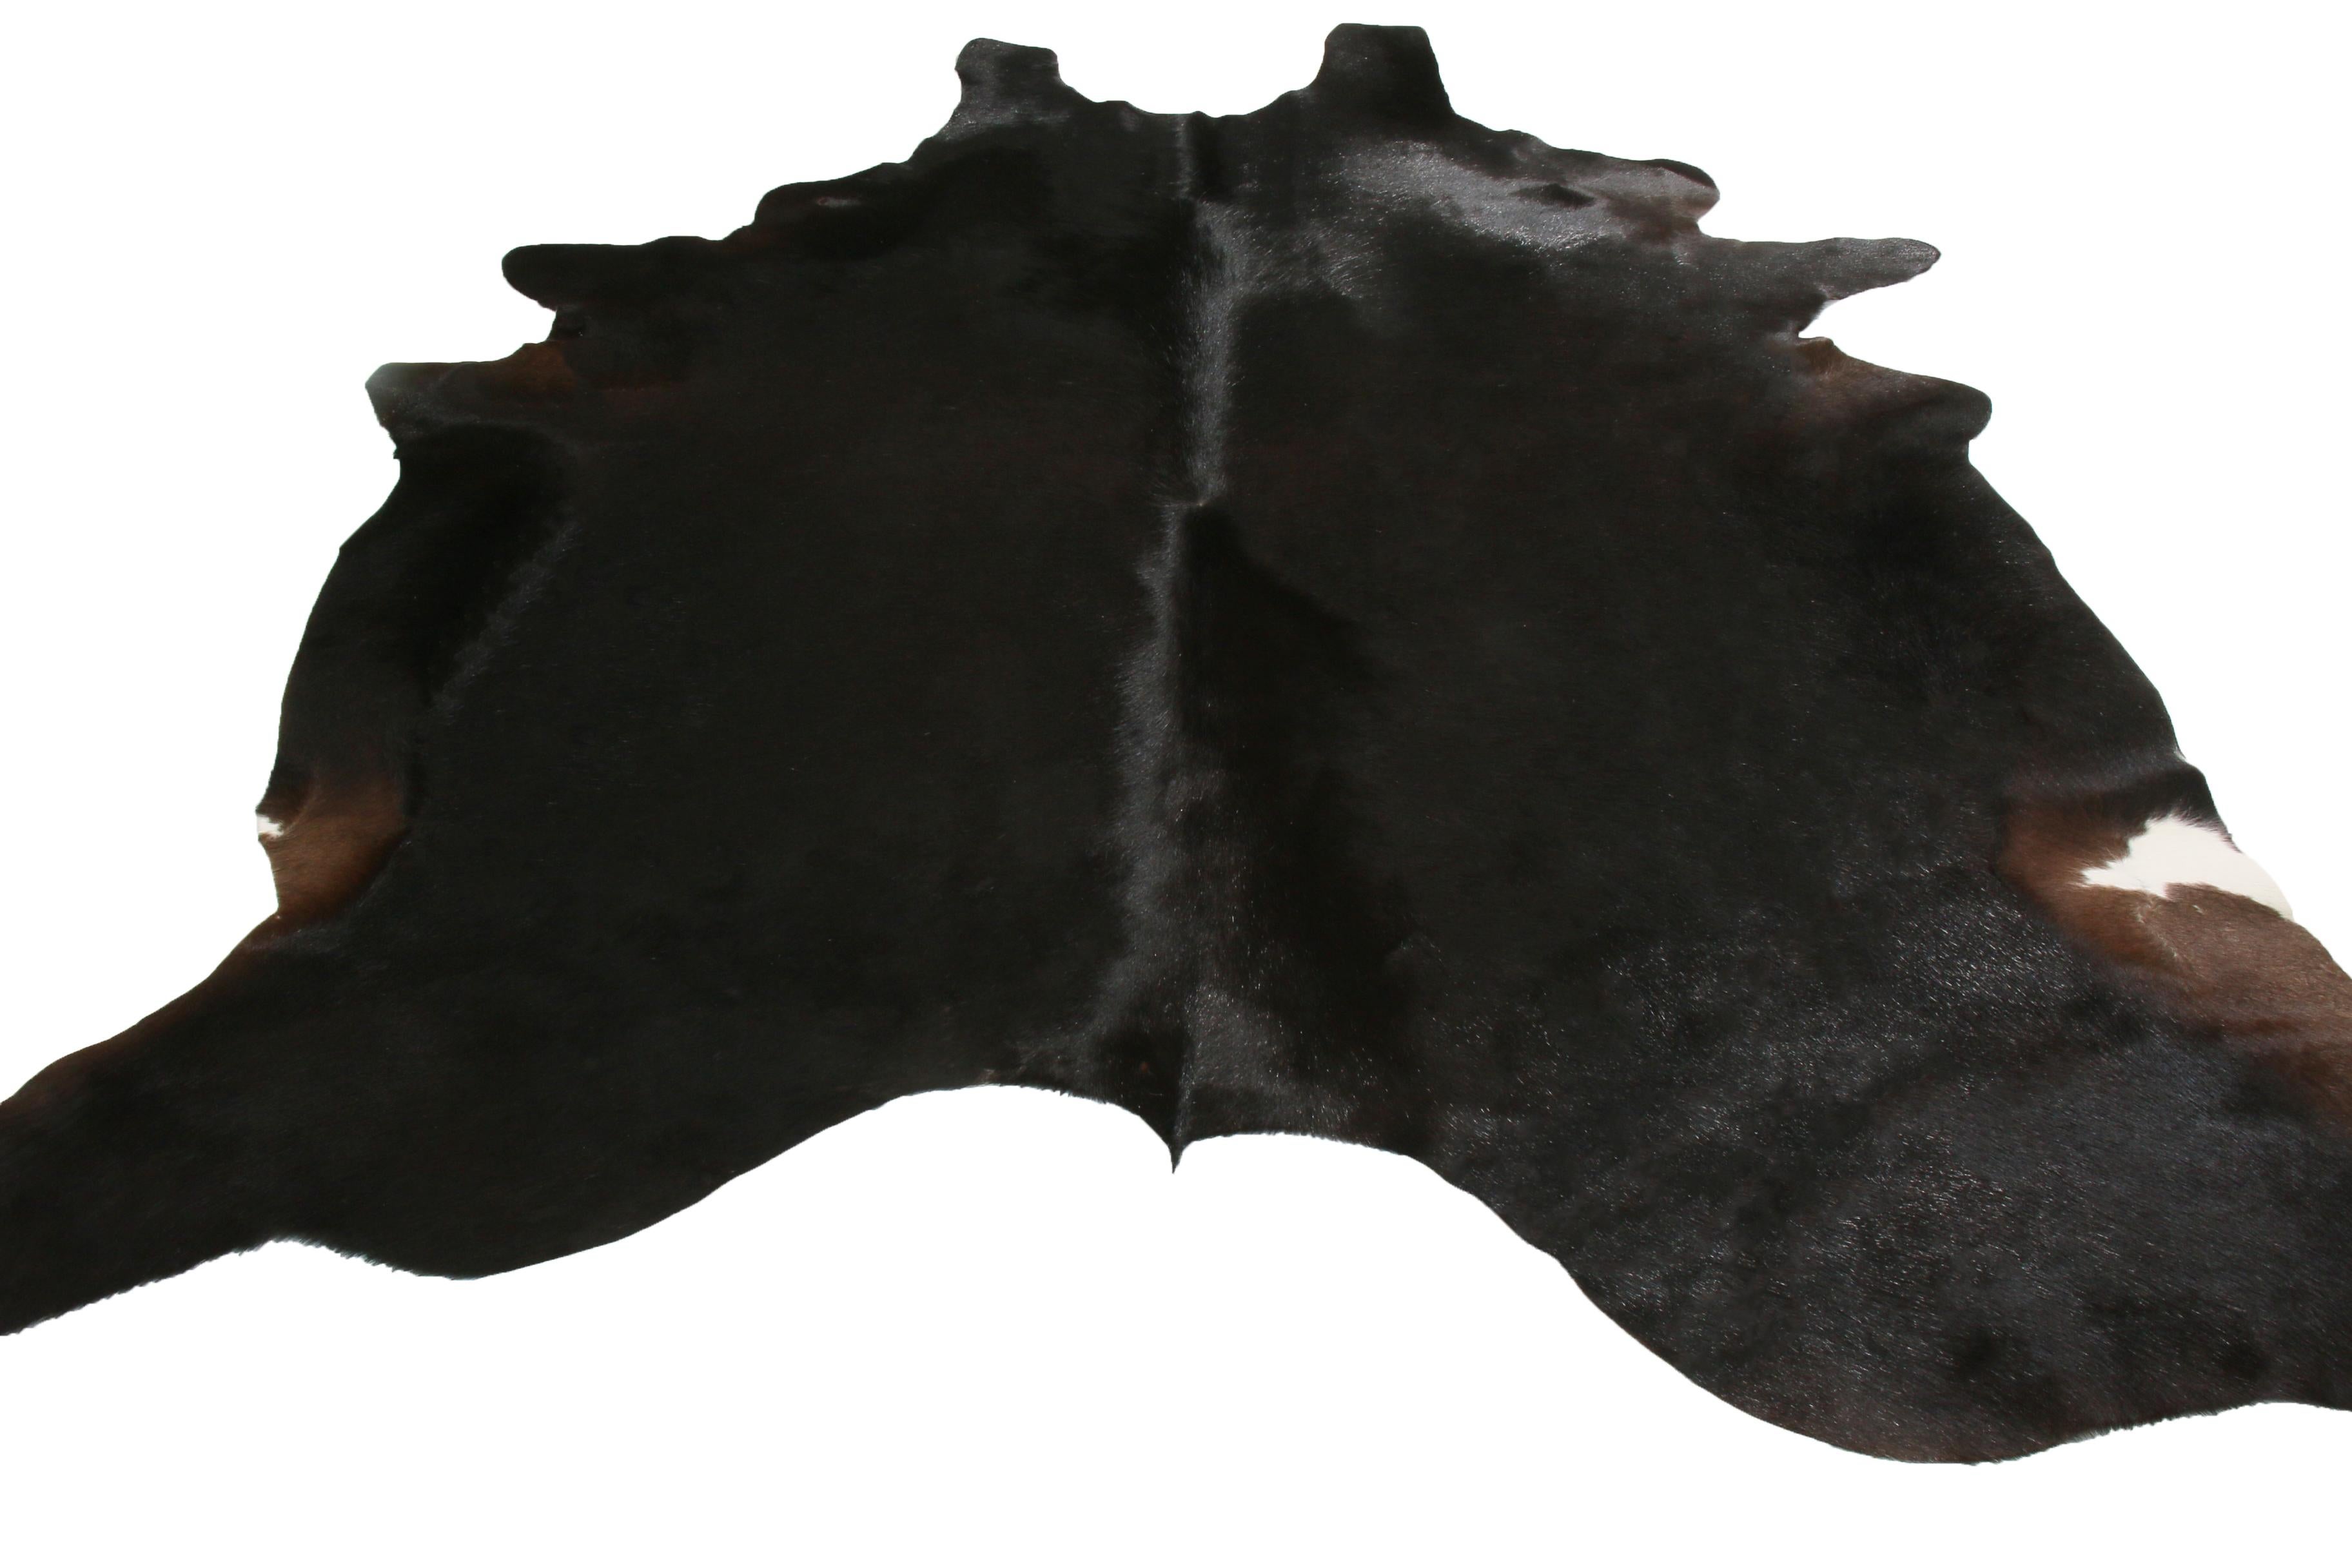 Originating from the United States, this contemporary leather cowhide rug has natural brown and block colorways with minimal beige accents to its hide, a distinguished choice for more luxurious spaces. This tannery maintained the original gentility